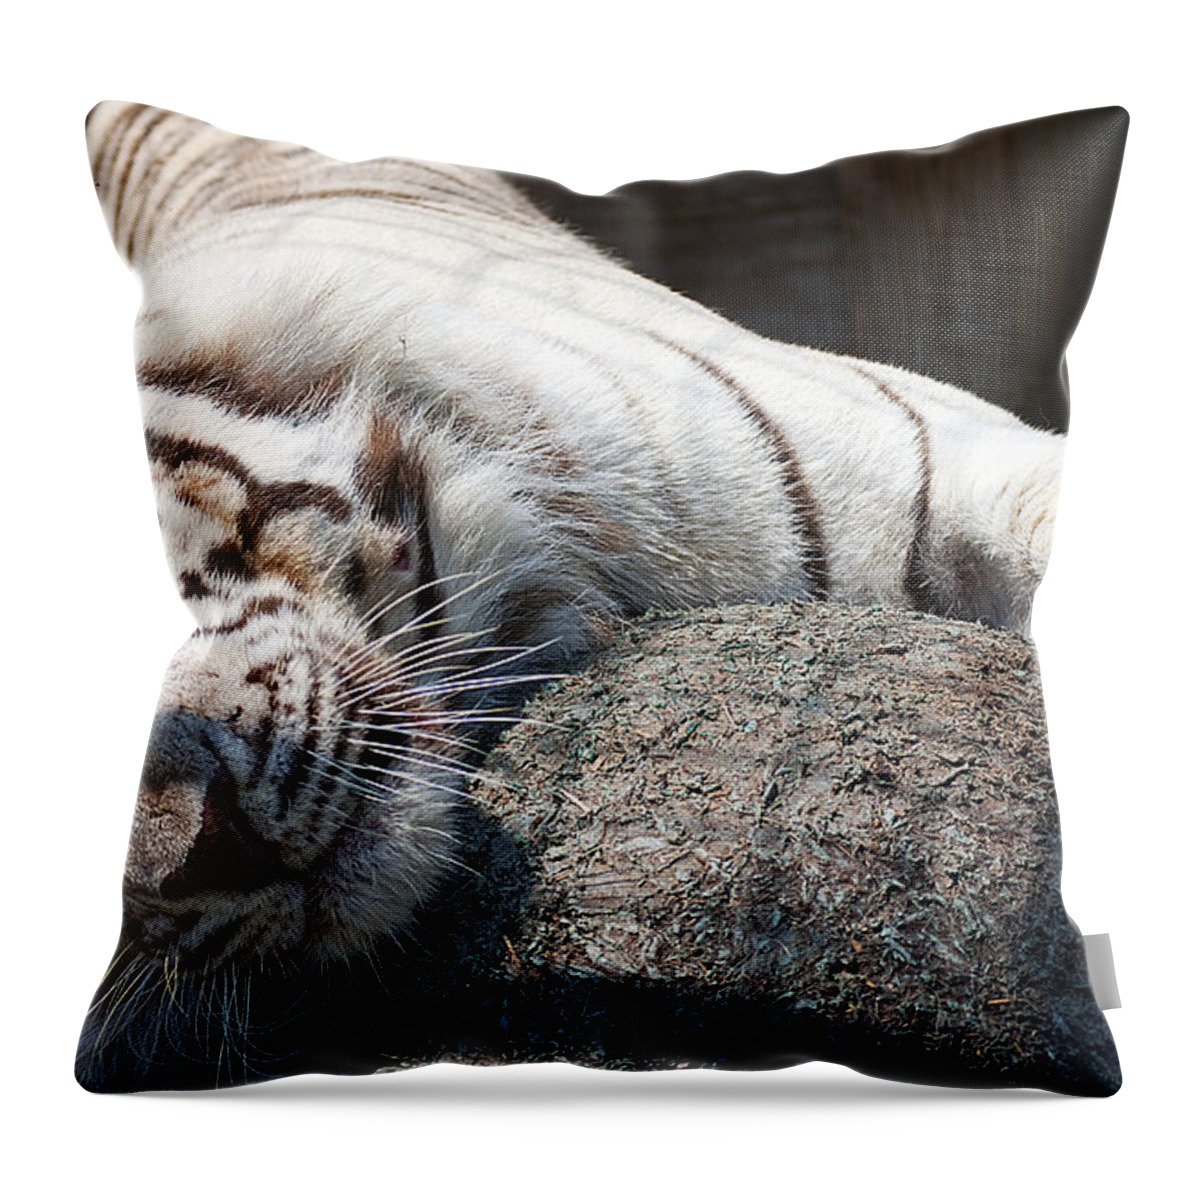 Wildlife Throw Pillow featuring the photograph Playful Tiger by Kenneth Albin